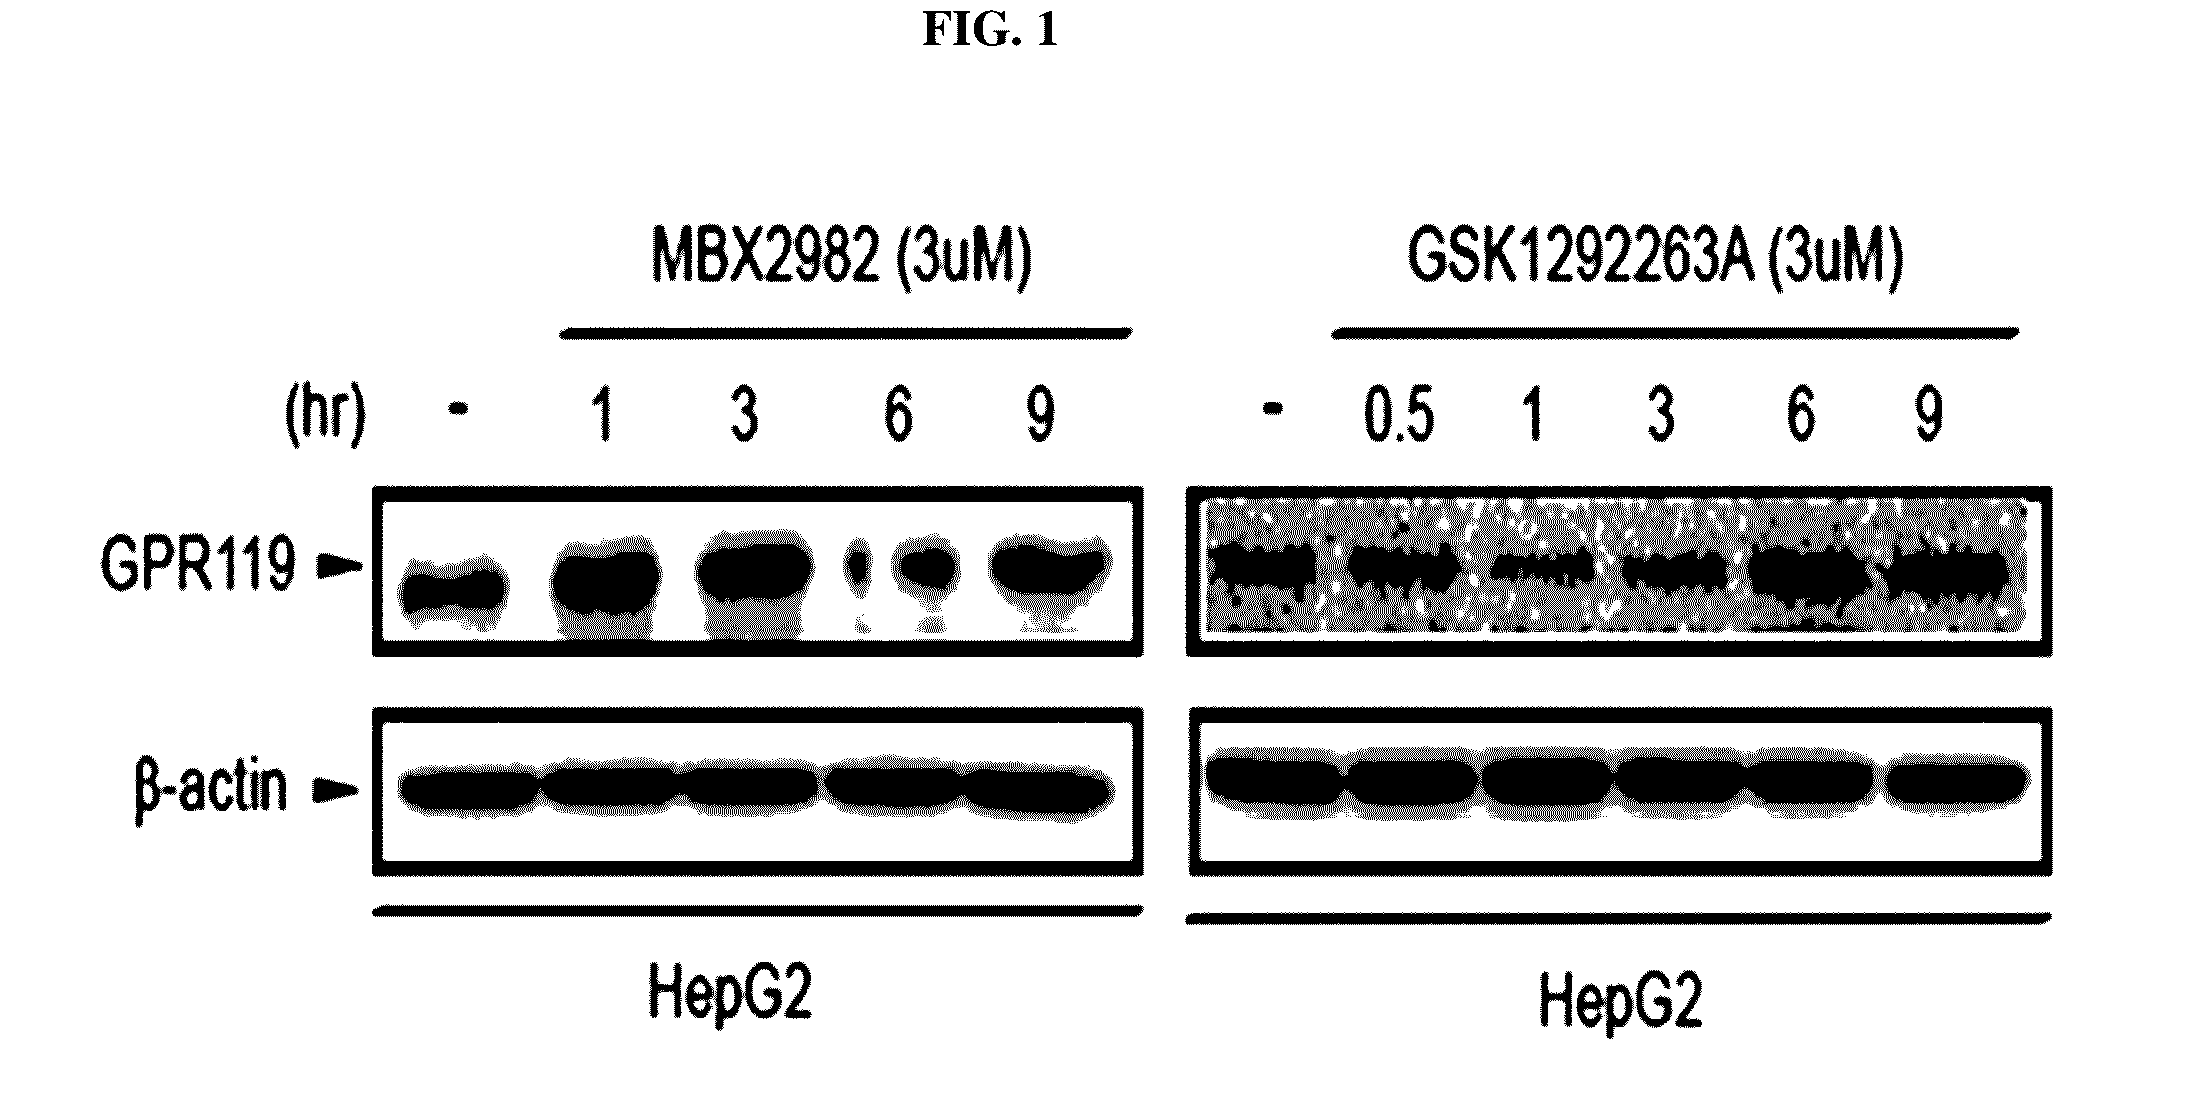 Pharmaceutical composition containing gpr119 ligand as active ingredient for preventing or treating non-alcoholic fatty liver disease